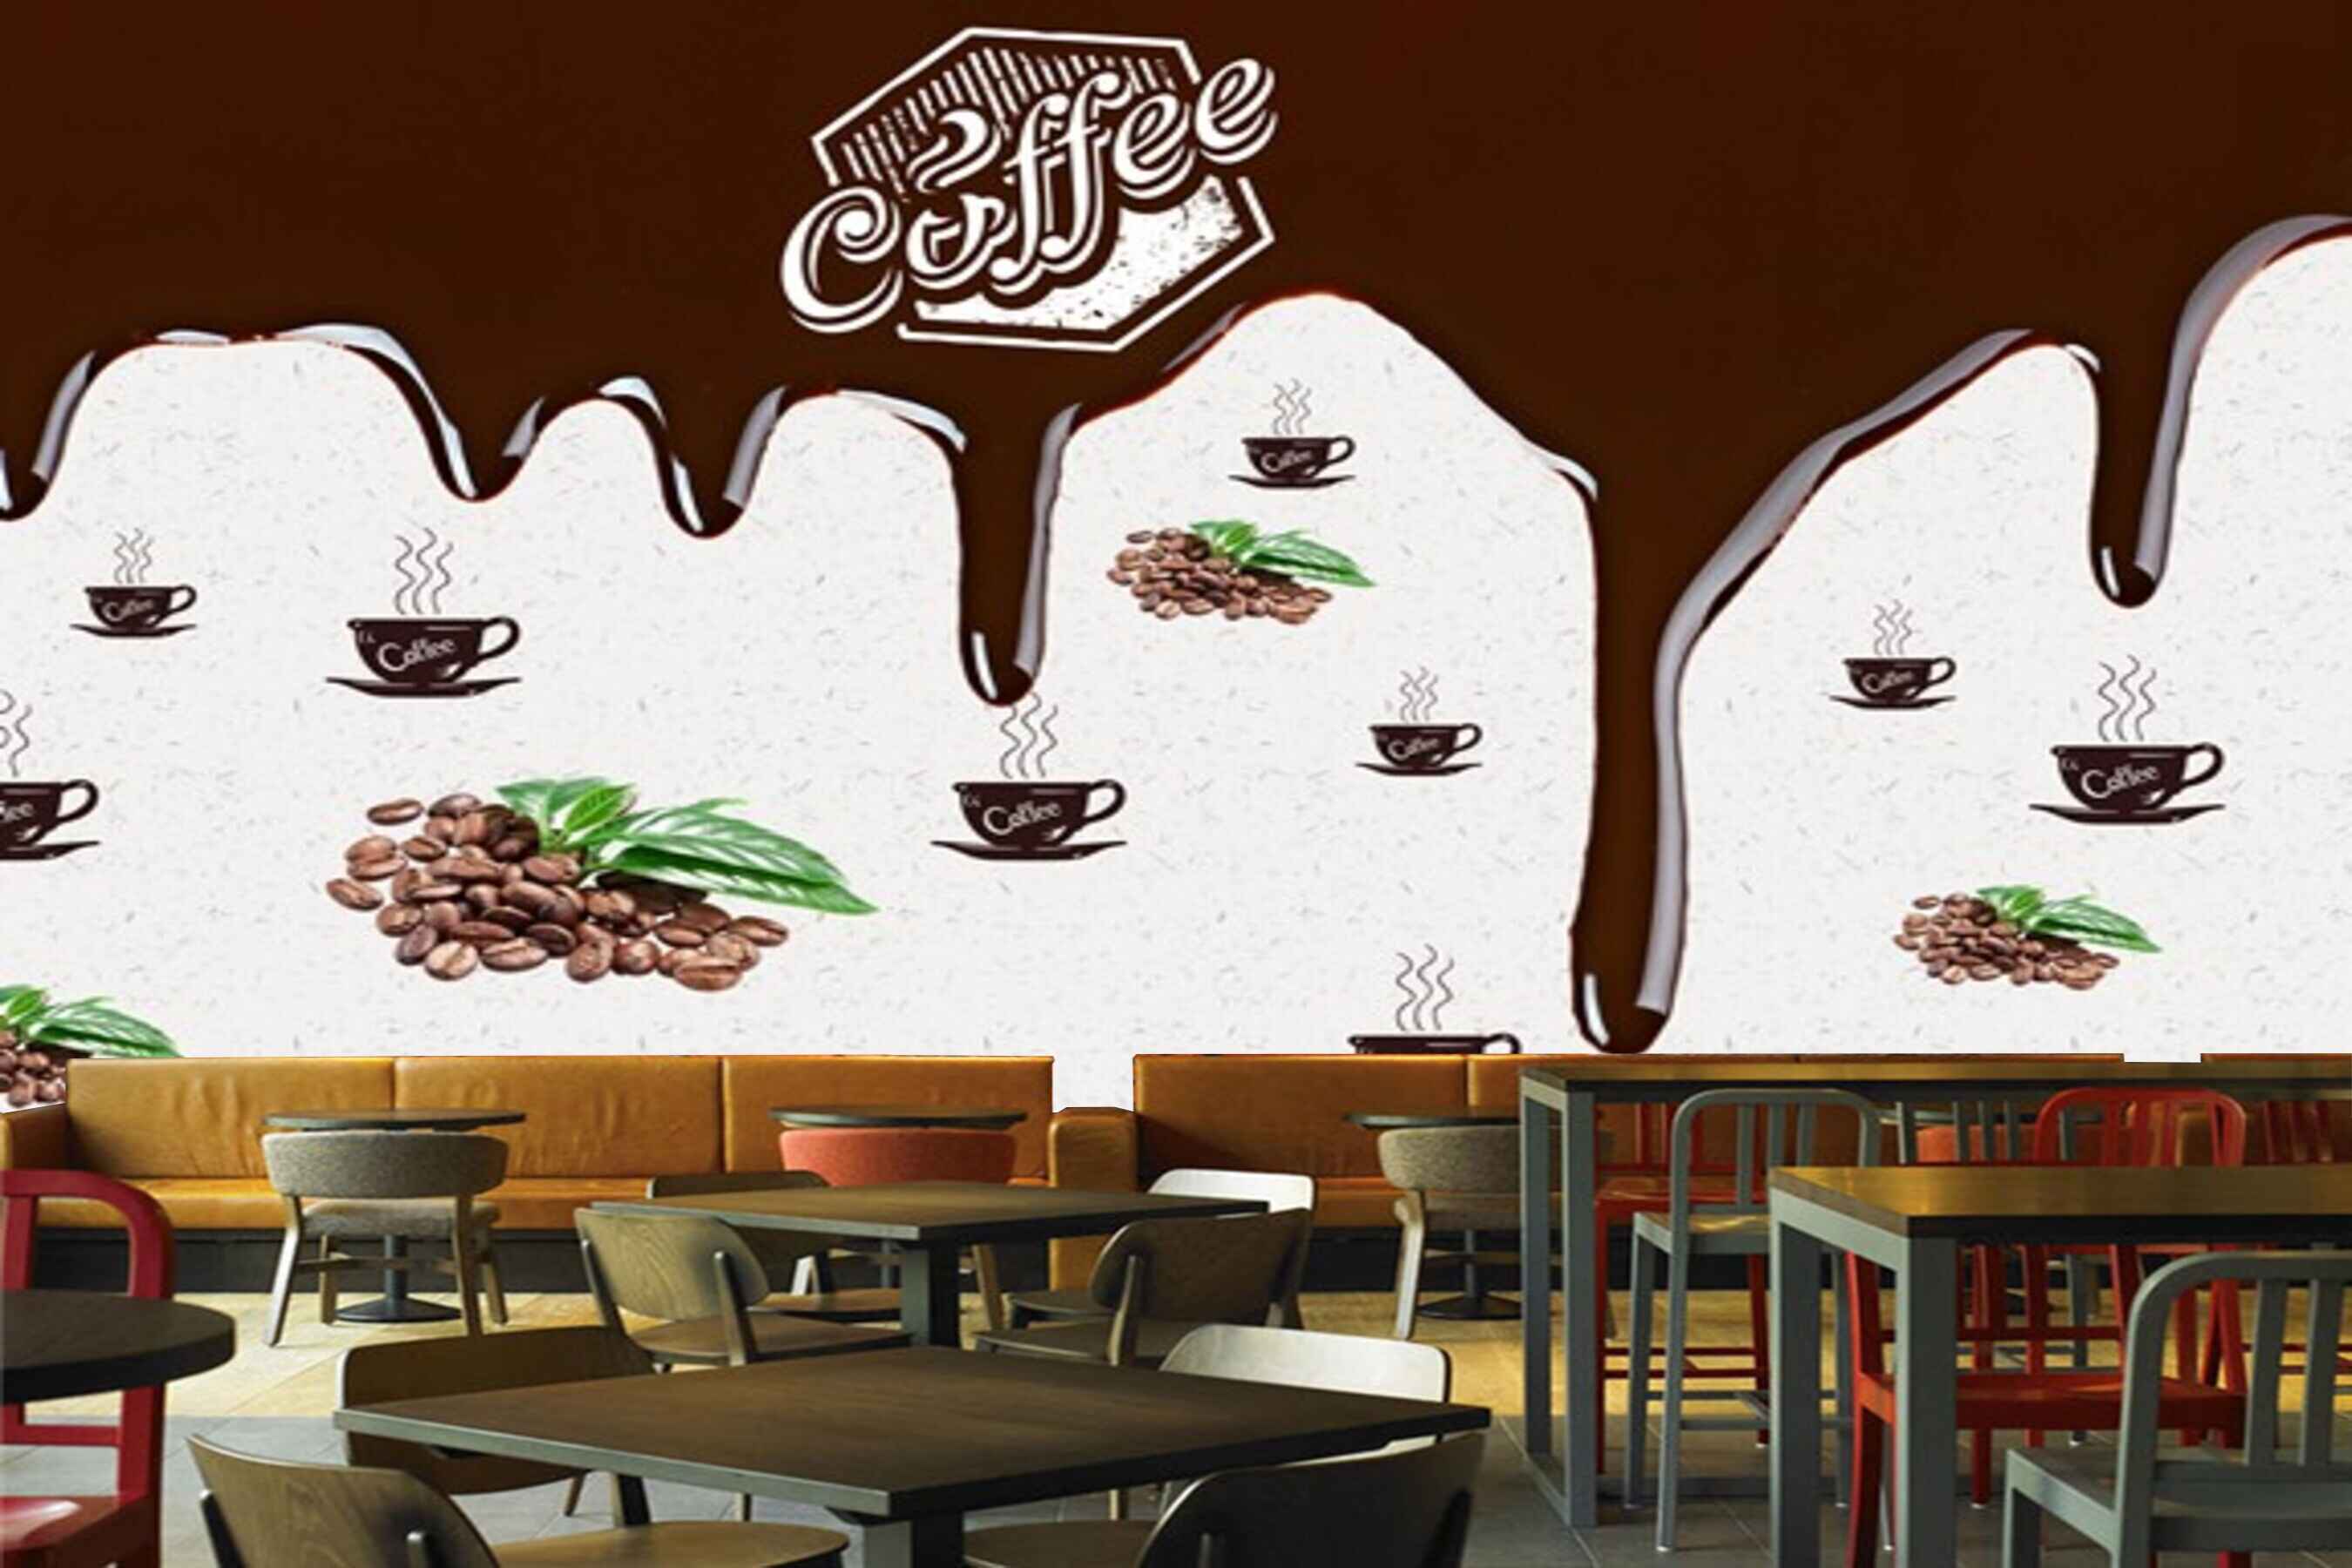 Avikalp MWZ2985 Coffee Seed Cups Leaves HD Wallpaper for Cafe Restaurant